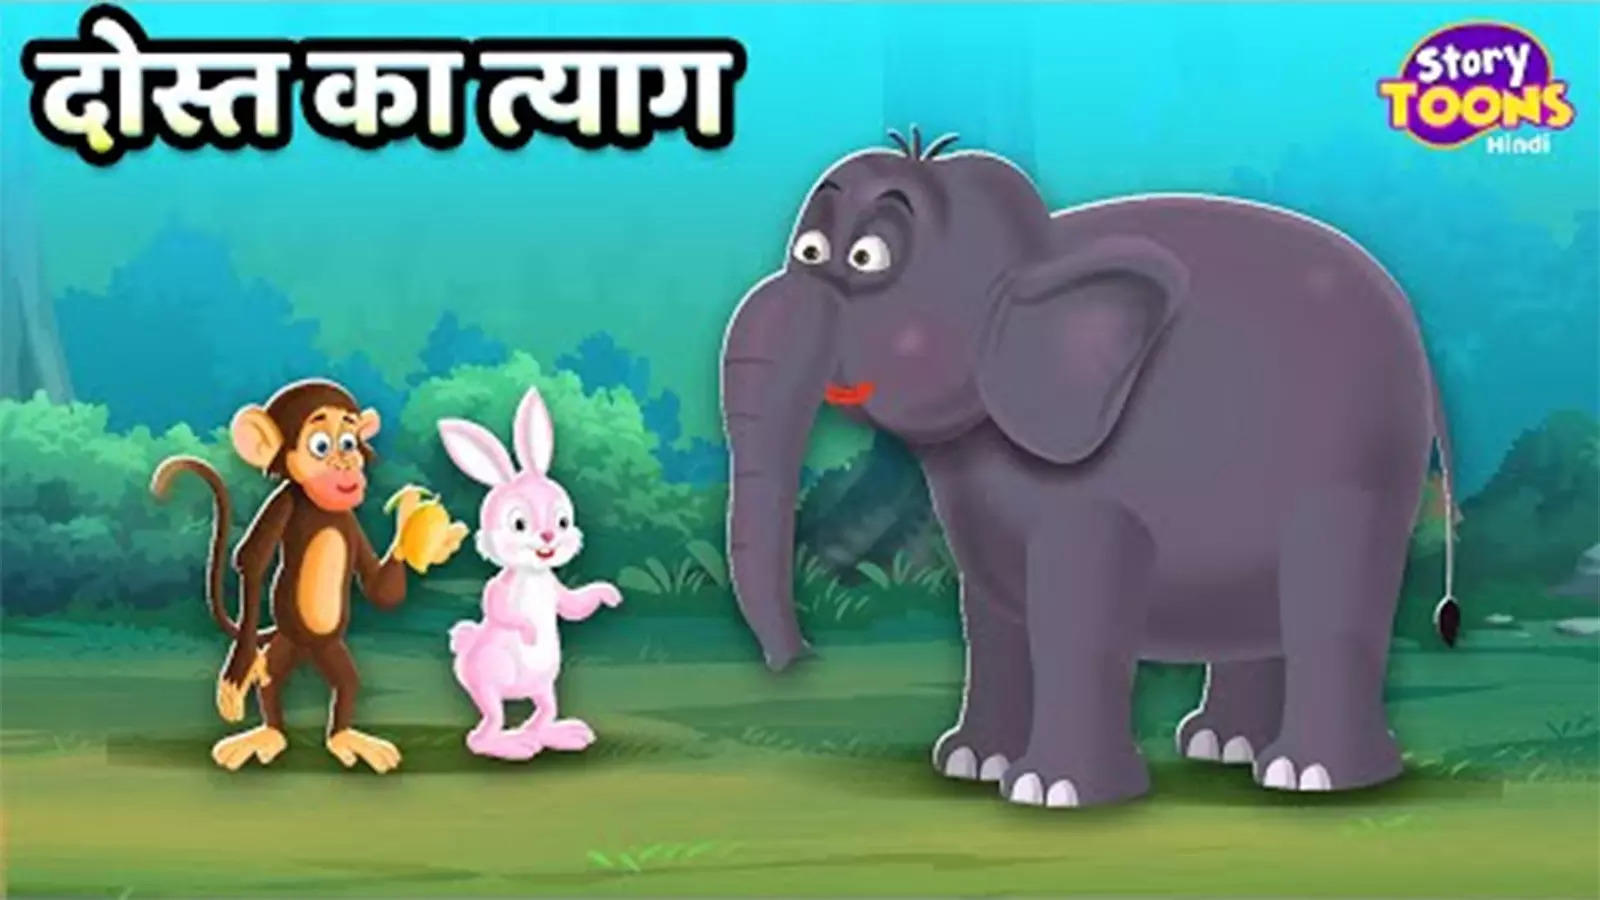 Check Out Latest Children Hindi Story 'Dost Ka Tyag' For Kids - Check Out  Kids's Nursery Rhymes And Baby Songs In Hindi | Entertainment - Times of  India Videos